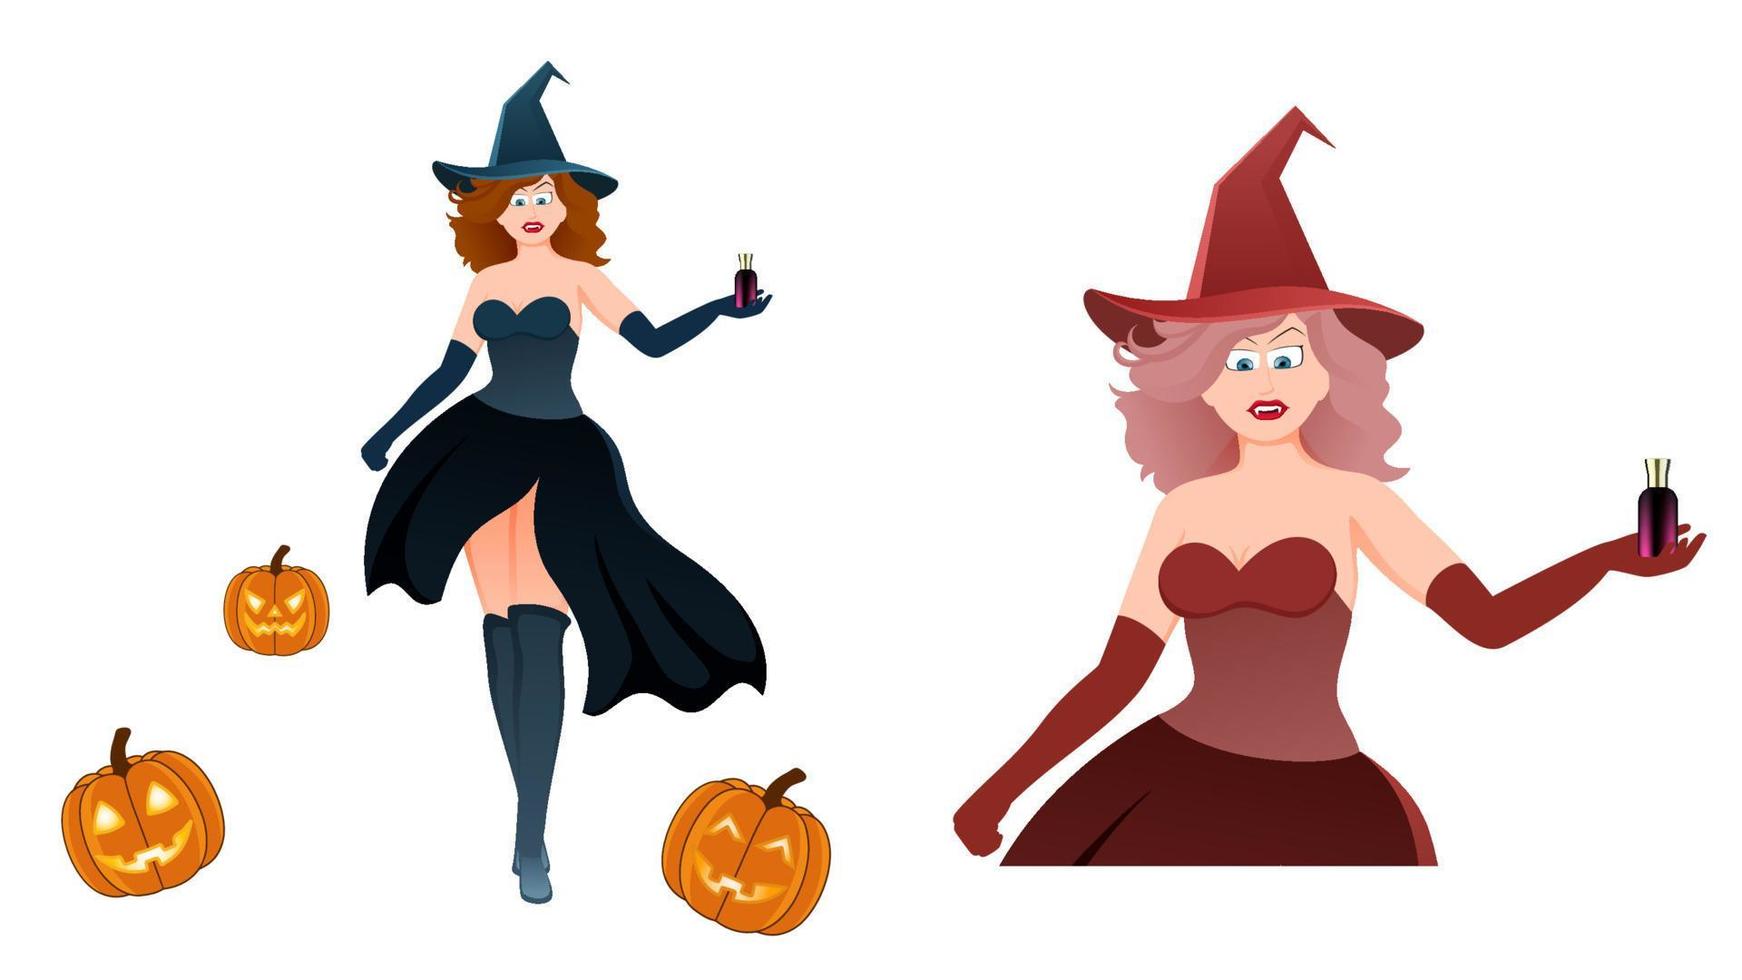 Halloween witch vector illustration, witch character vector illustration